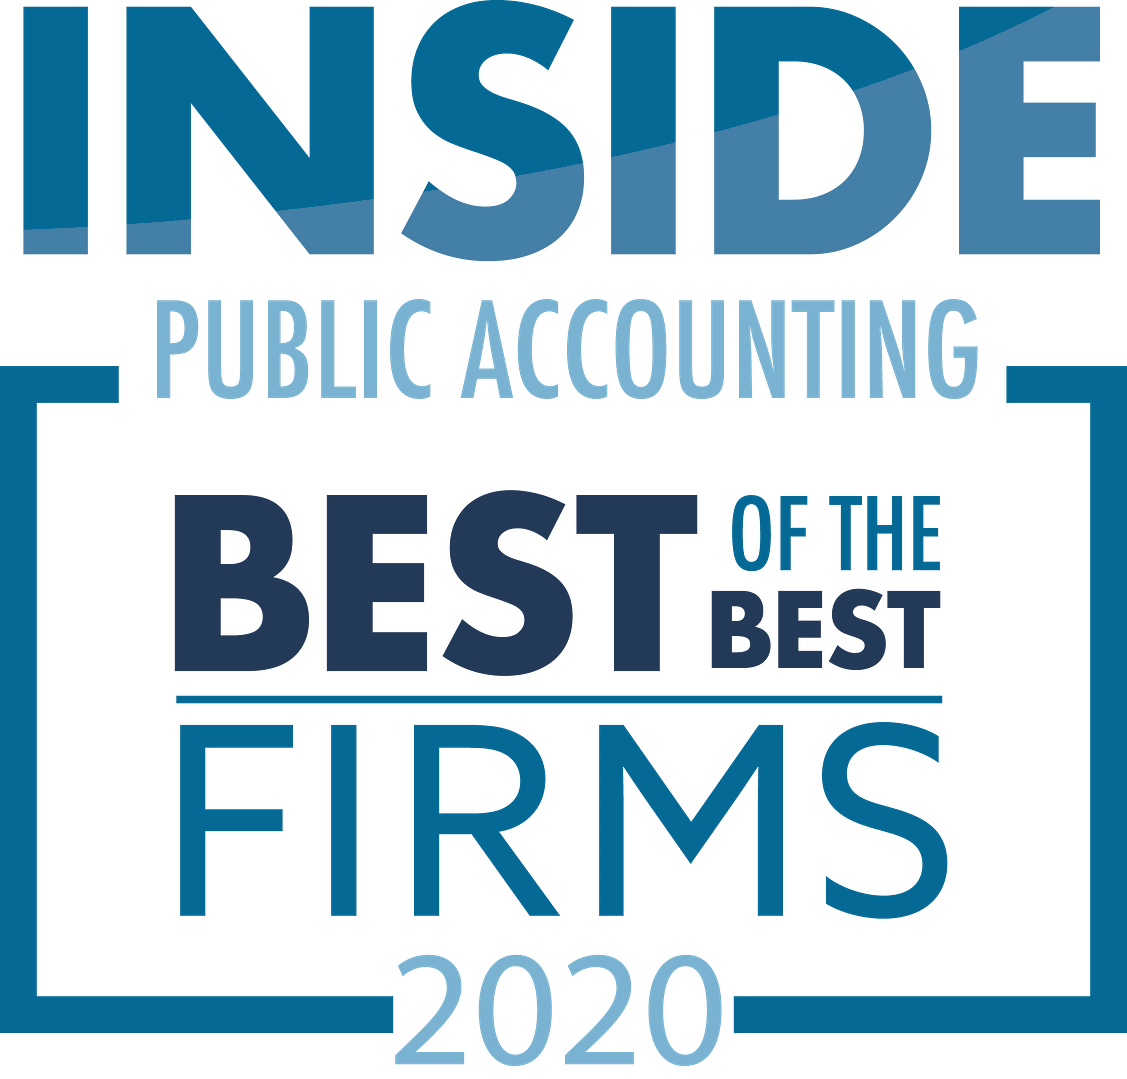 INSIDE Public Accounting Best of the Best Firms 2020 logo